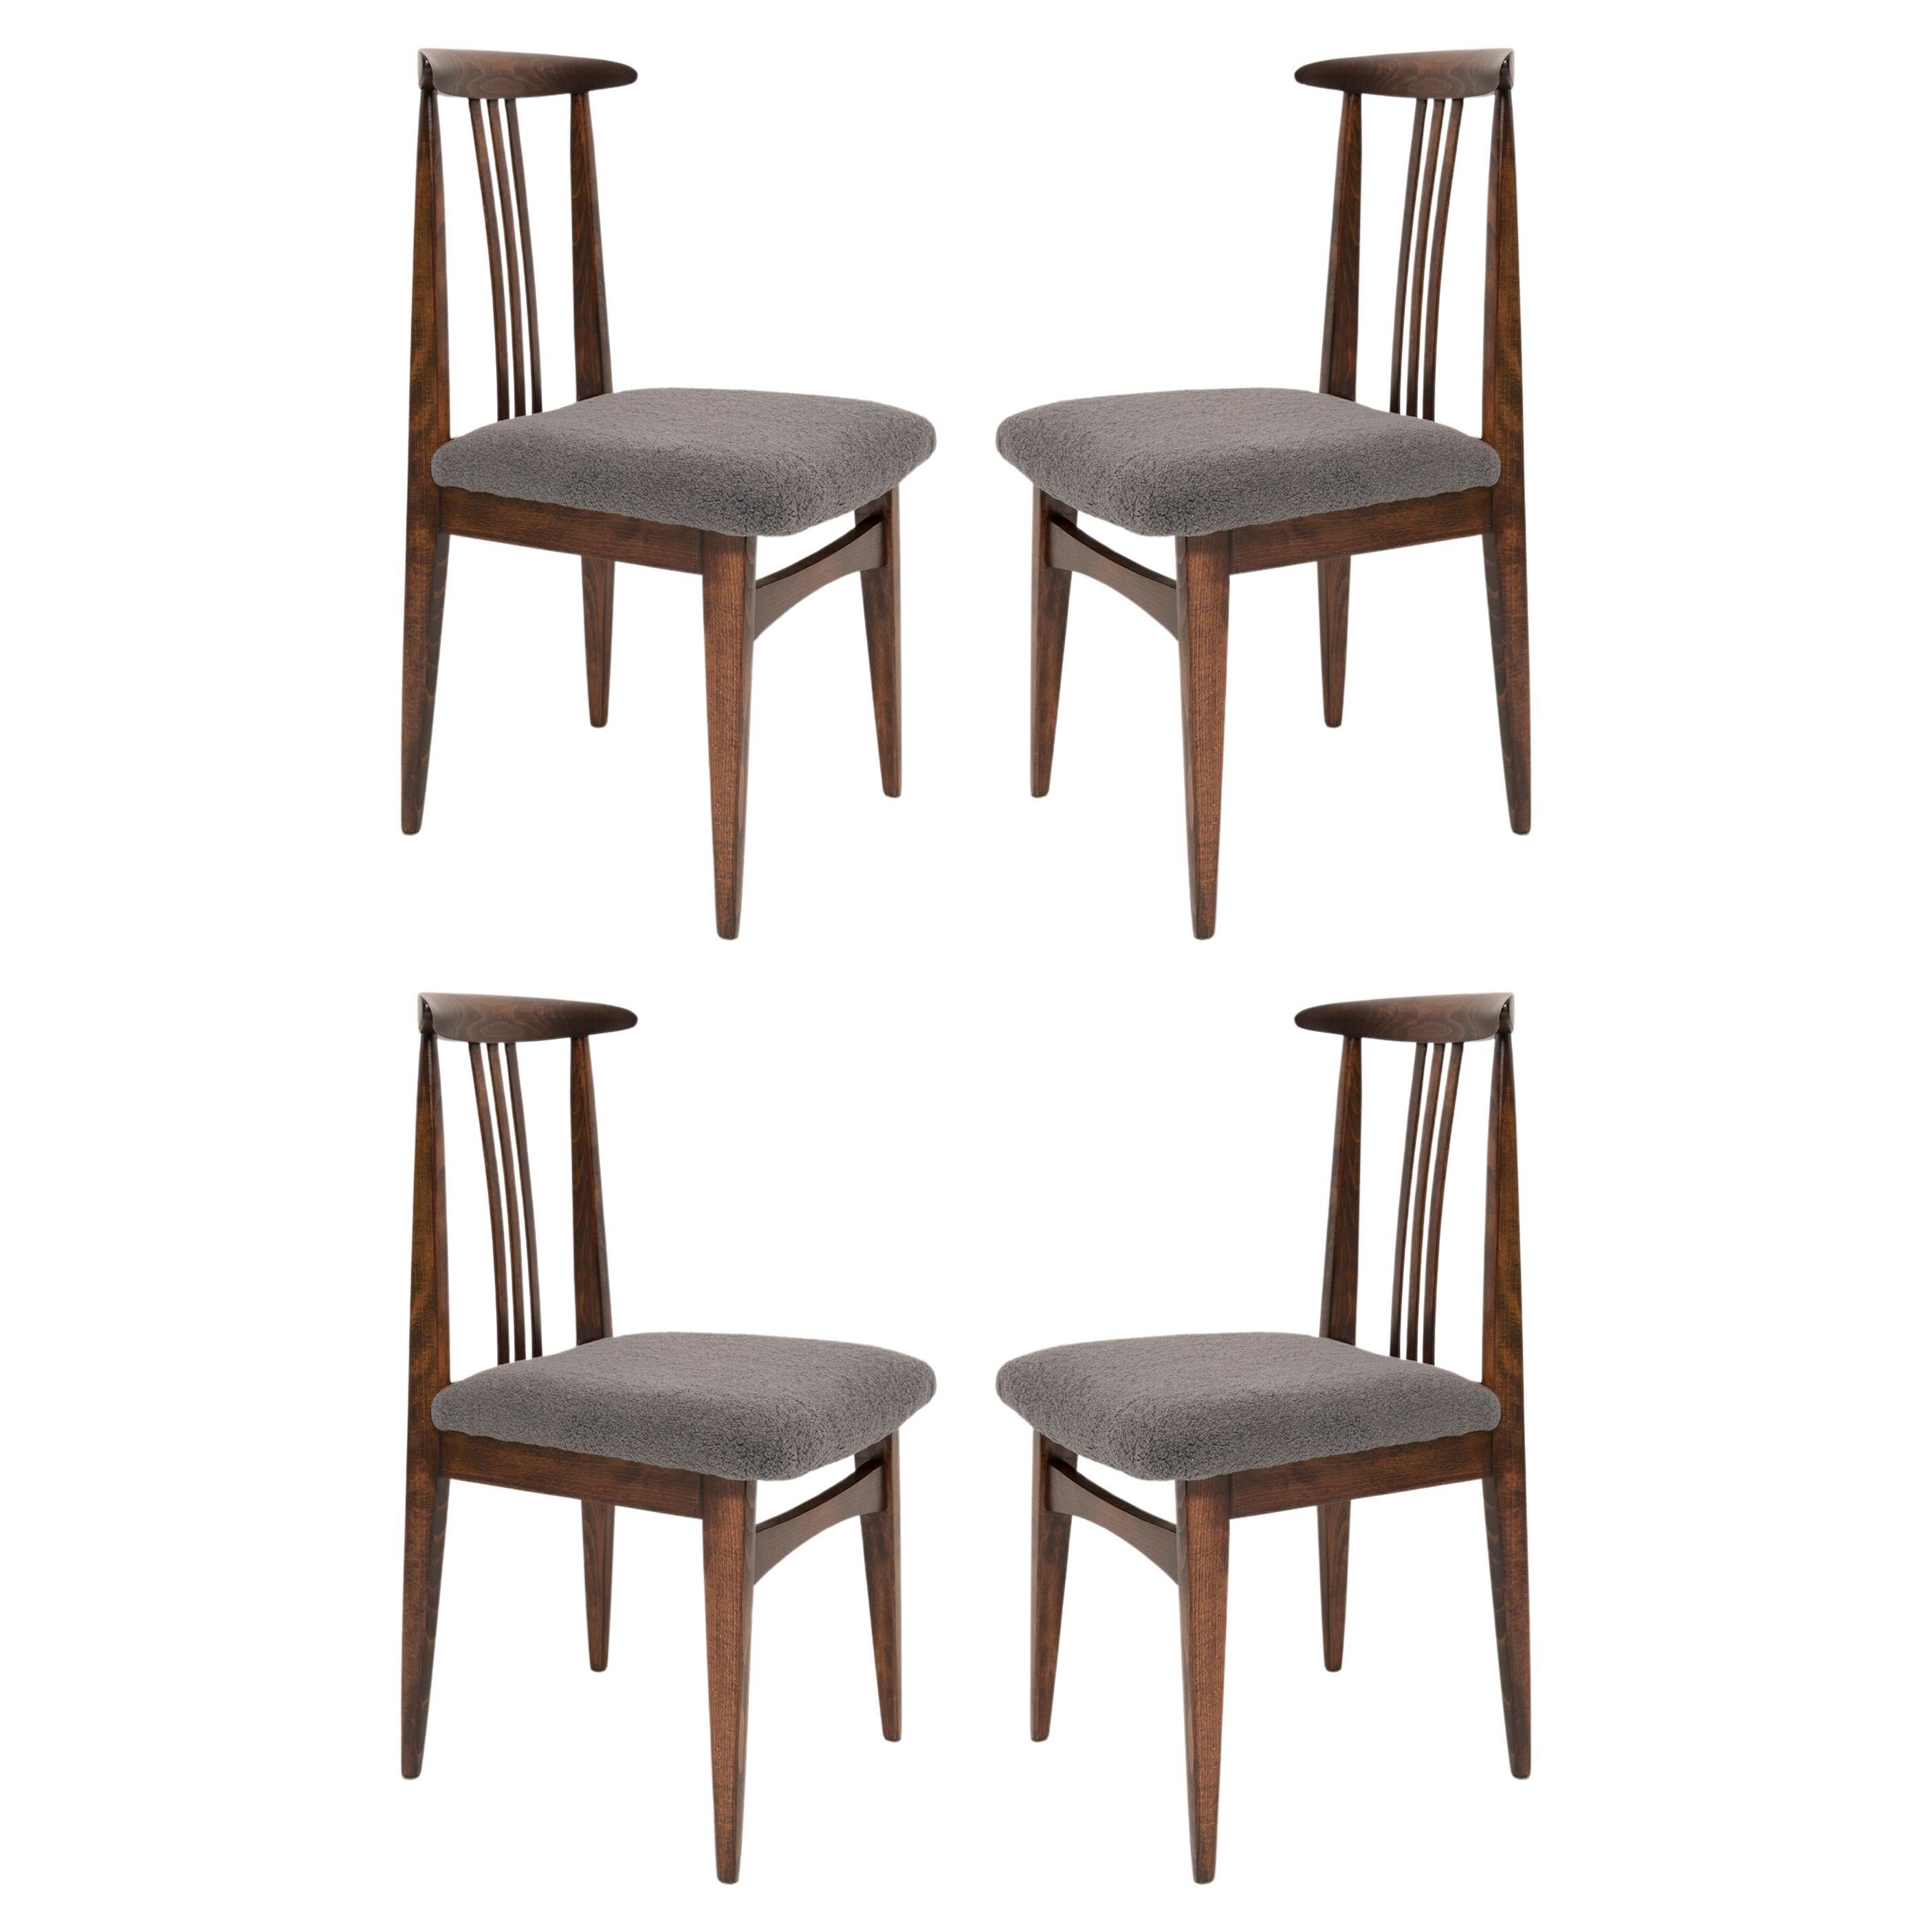 Set of Four Gray Boucle Chairs, by Zielinski, Poland, 1960s